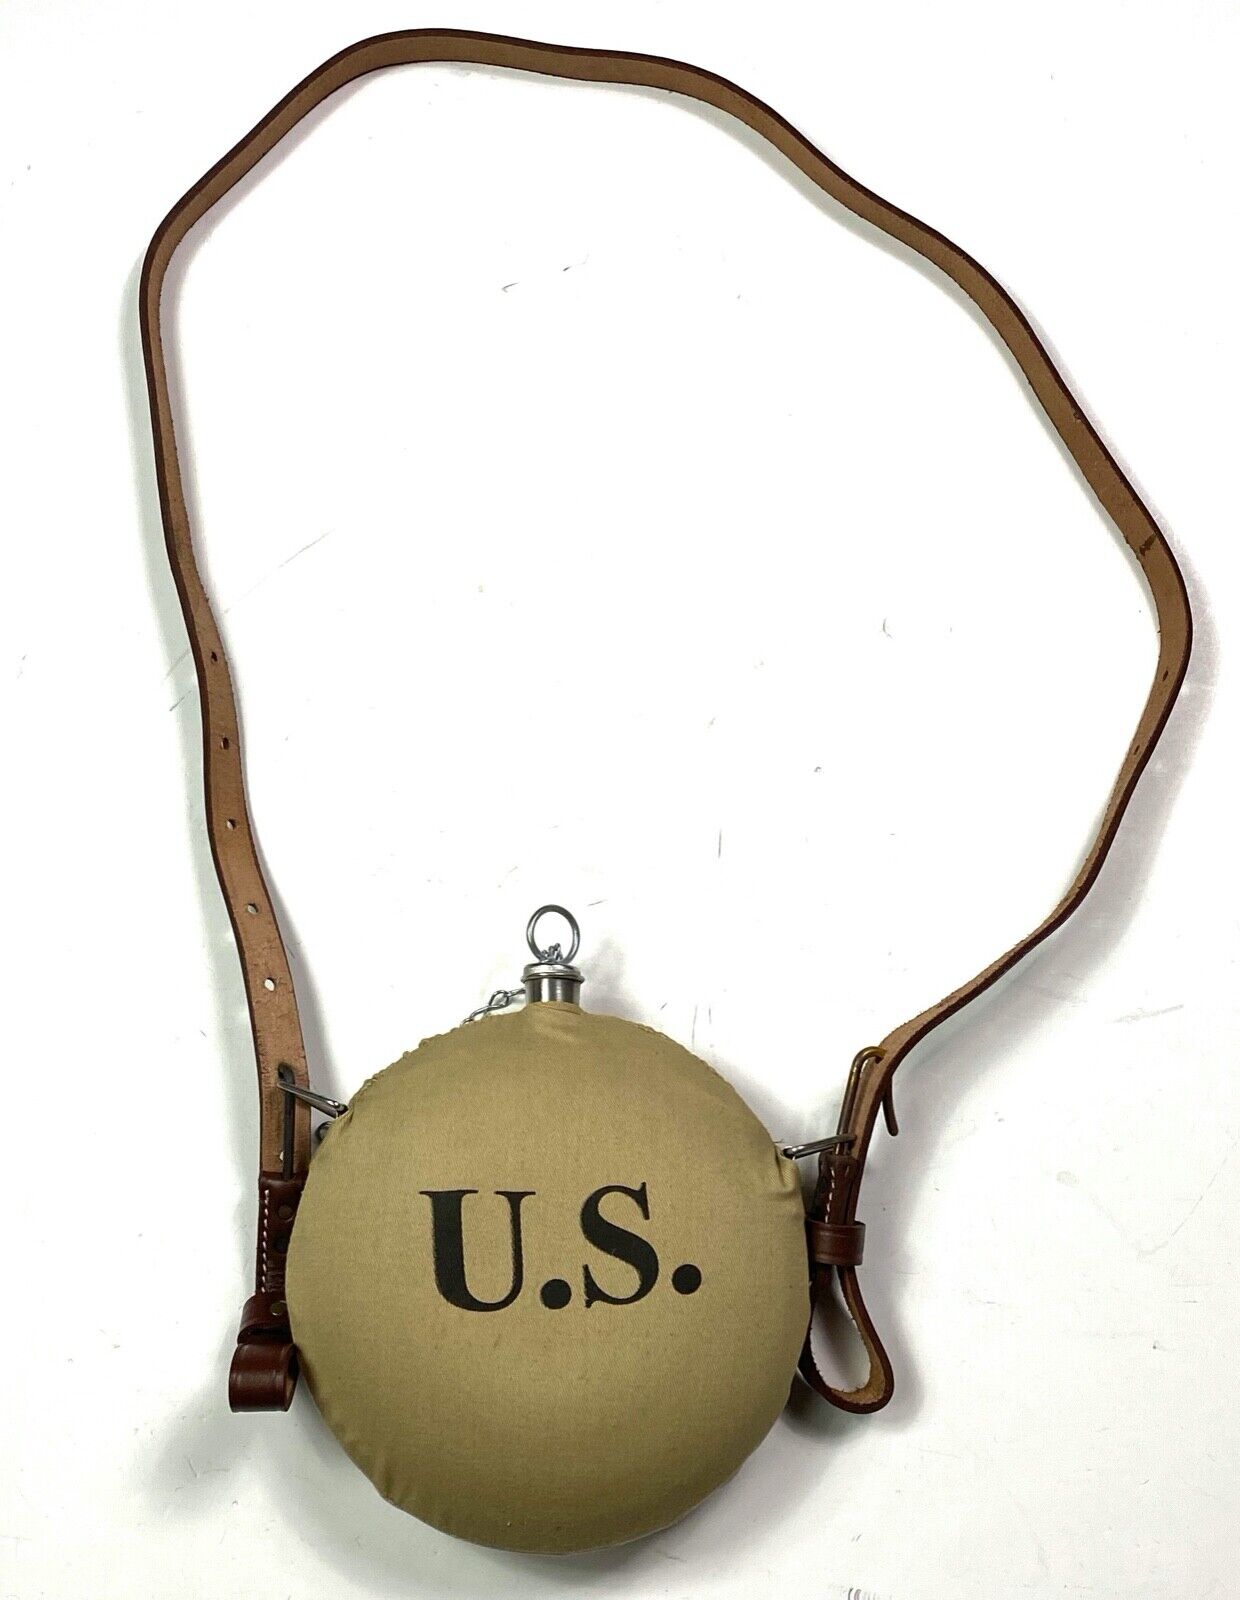  PRE-WWI SPANISH AMERICAN WAR US ARMY M1883 M1885 M1898 CANTEEN & STRAP